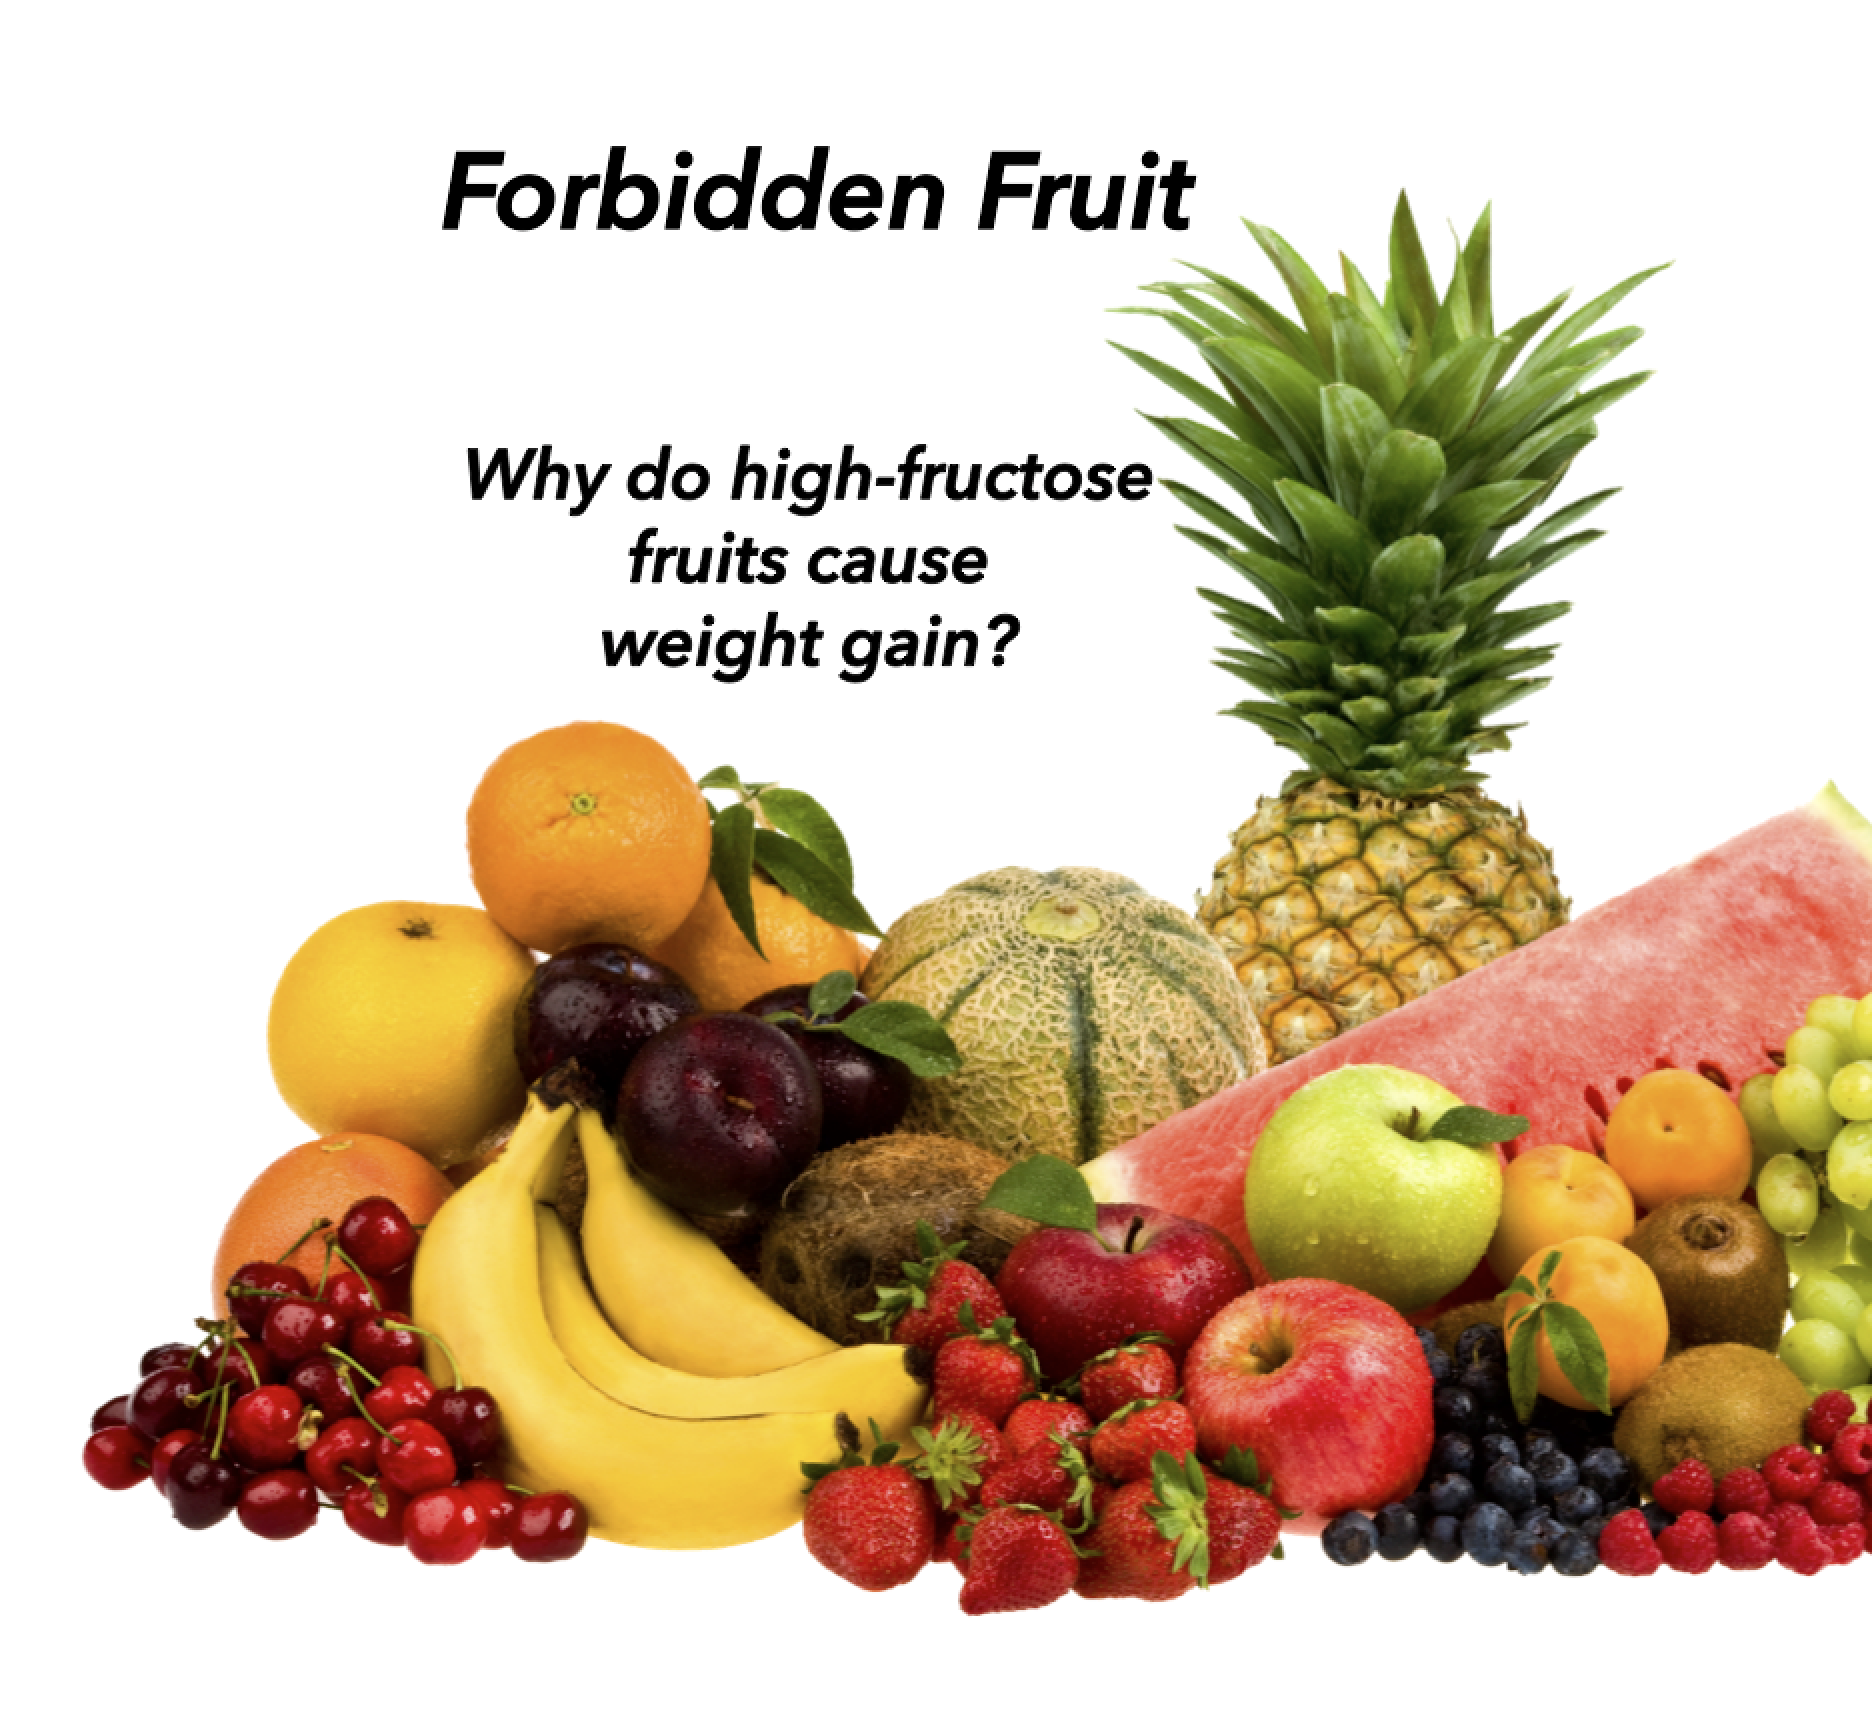 Forbidden Fruits, Which Ones Make You Fat? – Jane's Healthy Kitchen